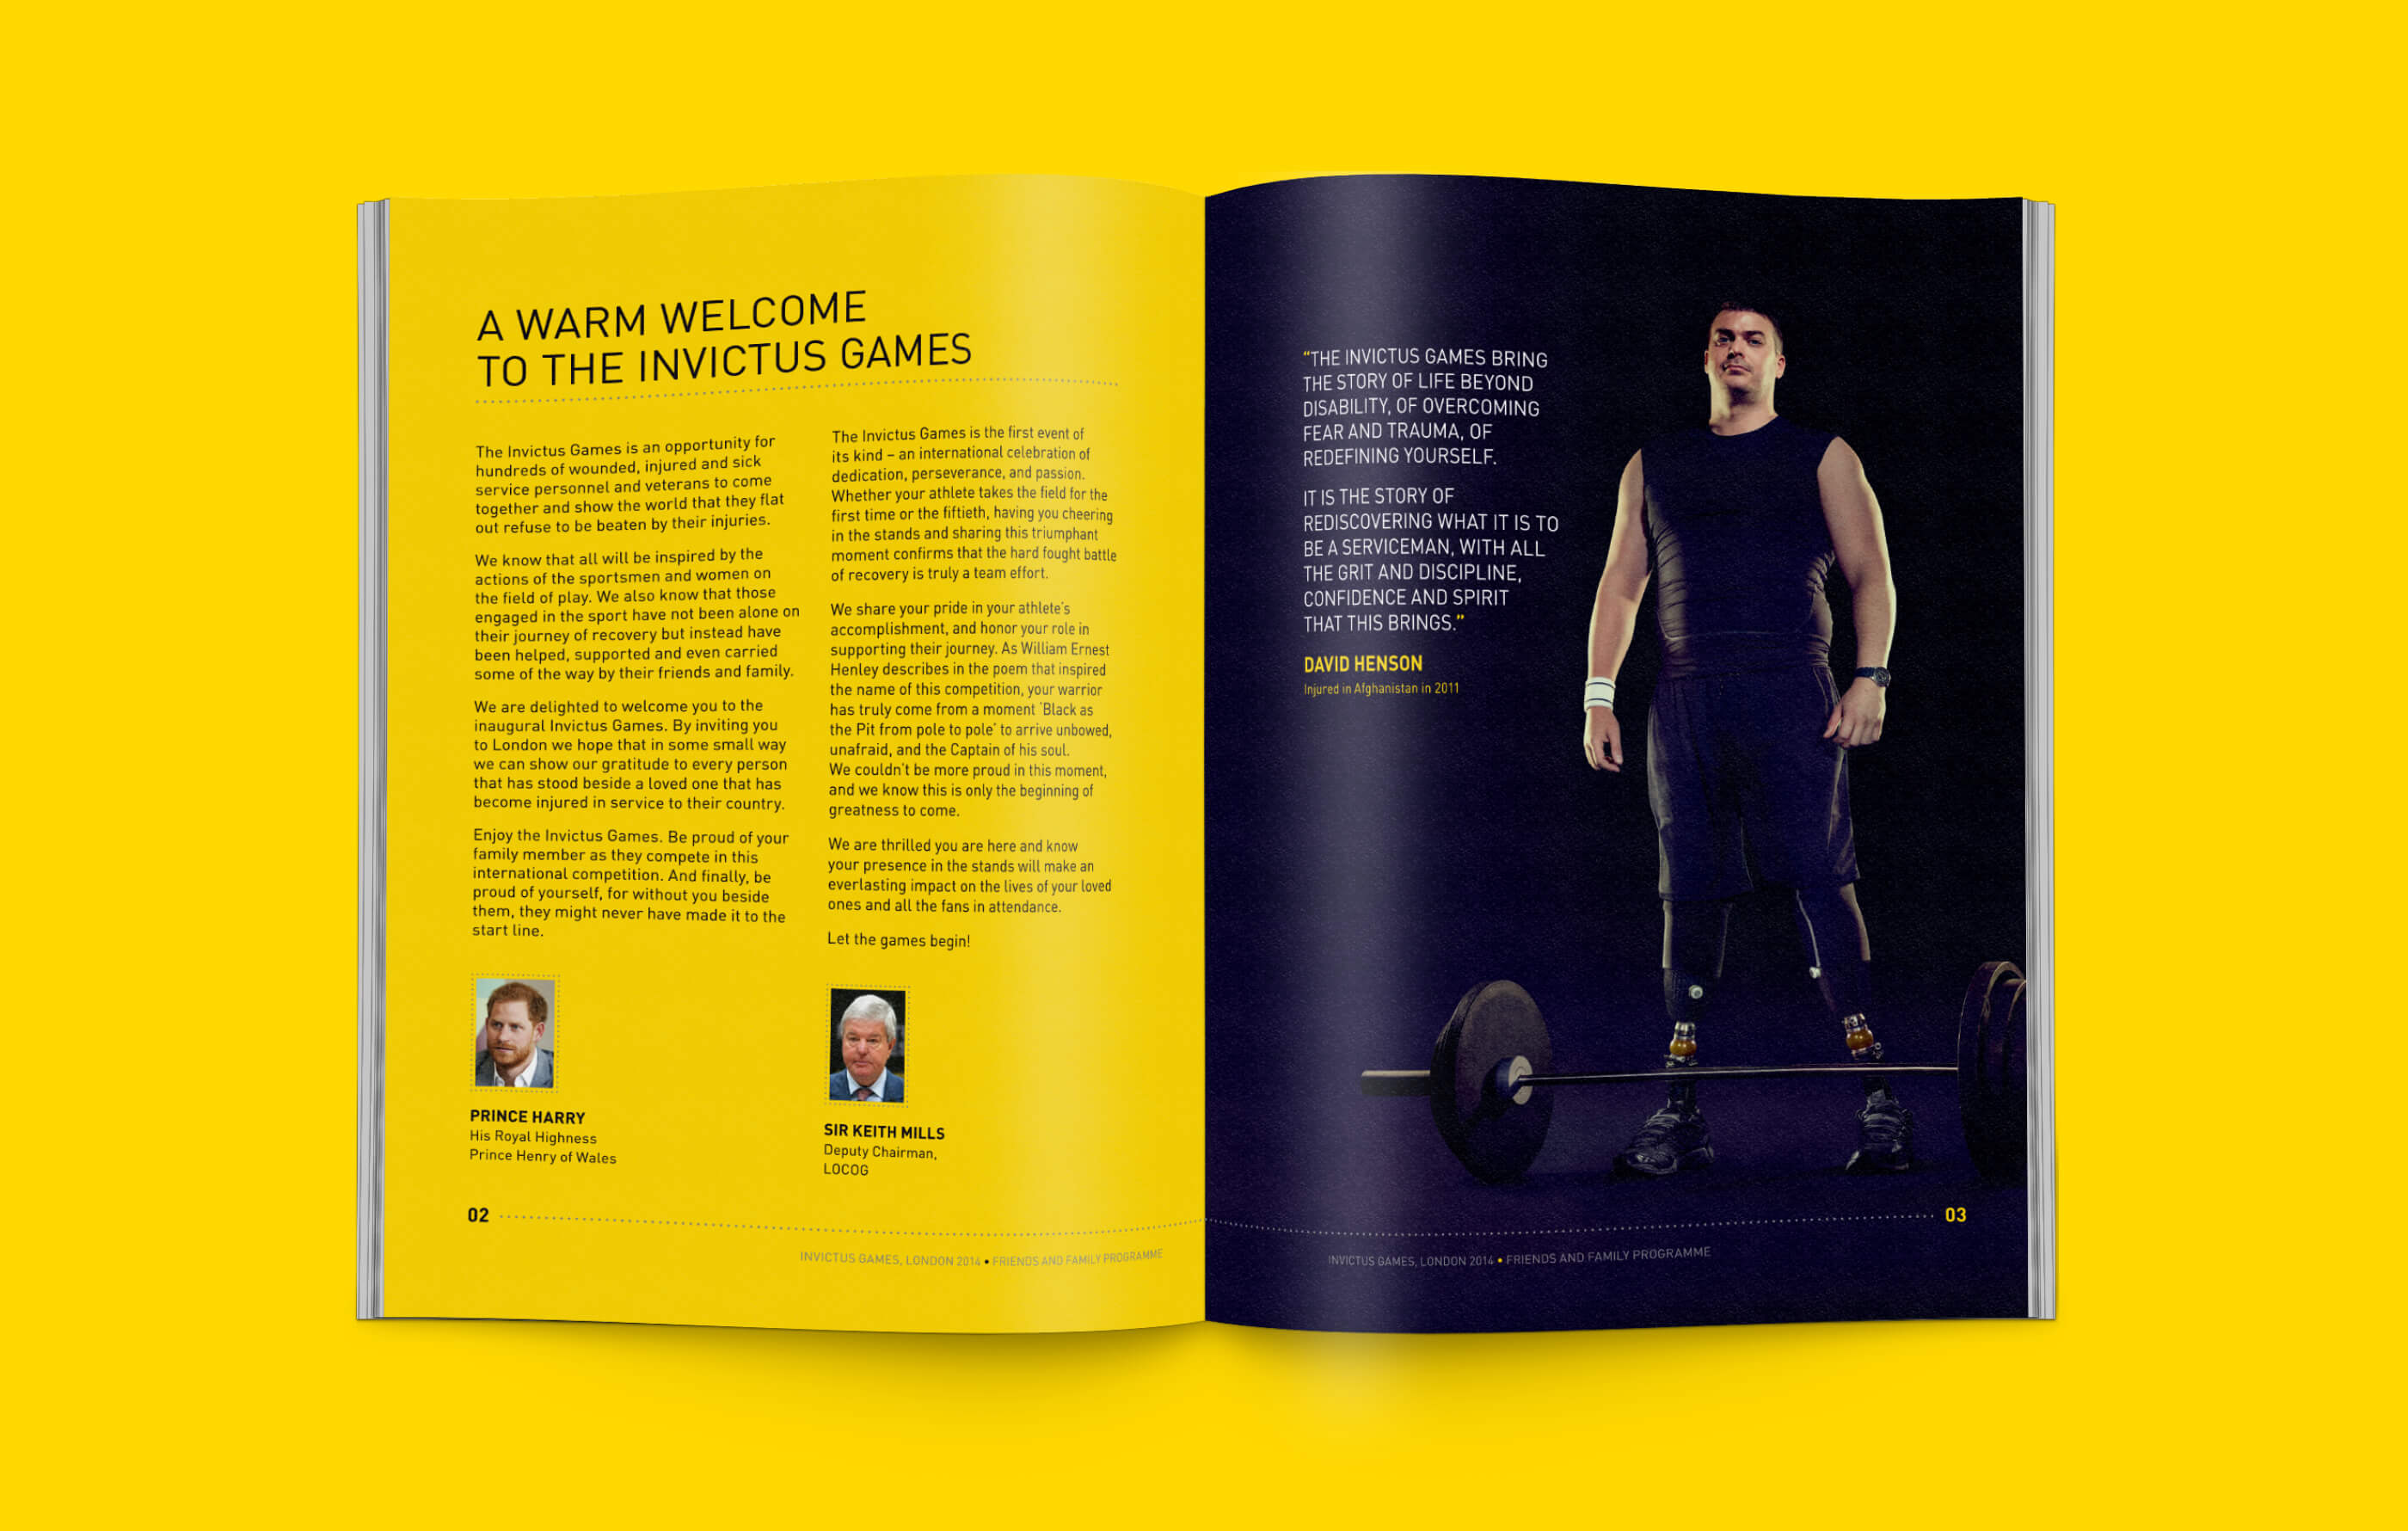 Opening spread of the printed booklet, featuring a welcome note on the left page from Prince Harry and image of David Henson, a paralympic weightlifter, on the right